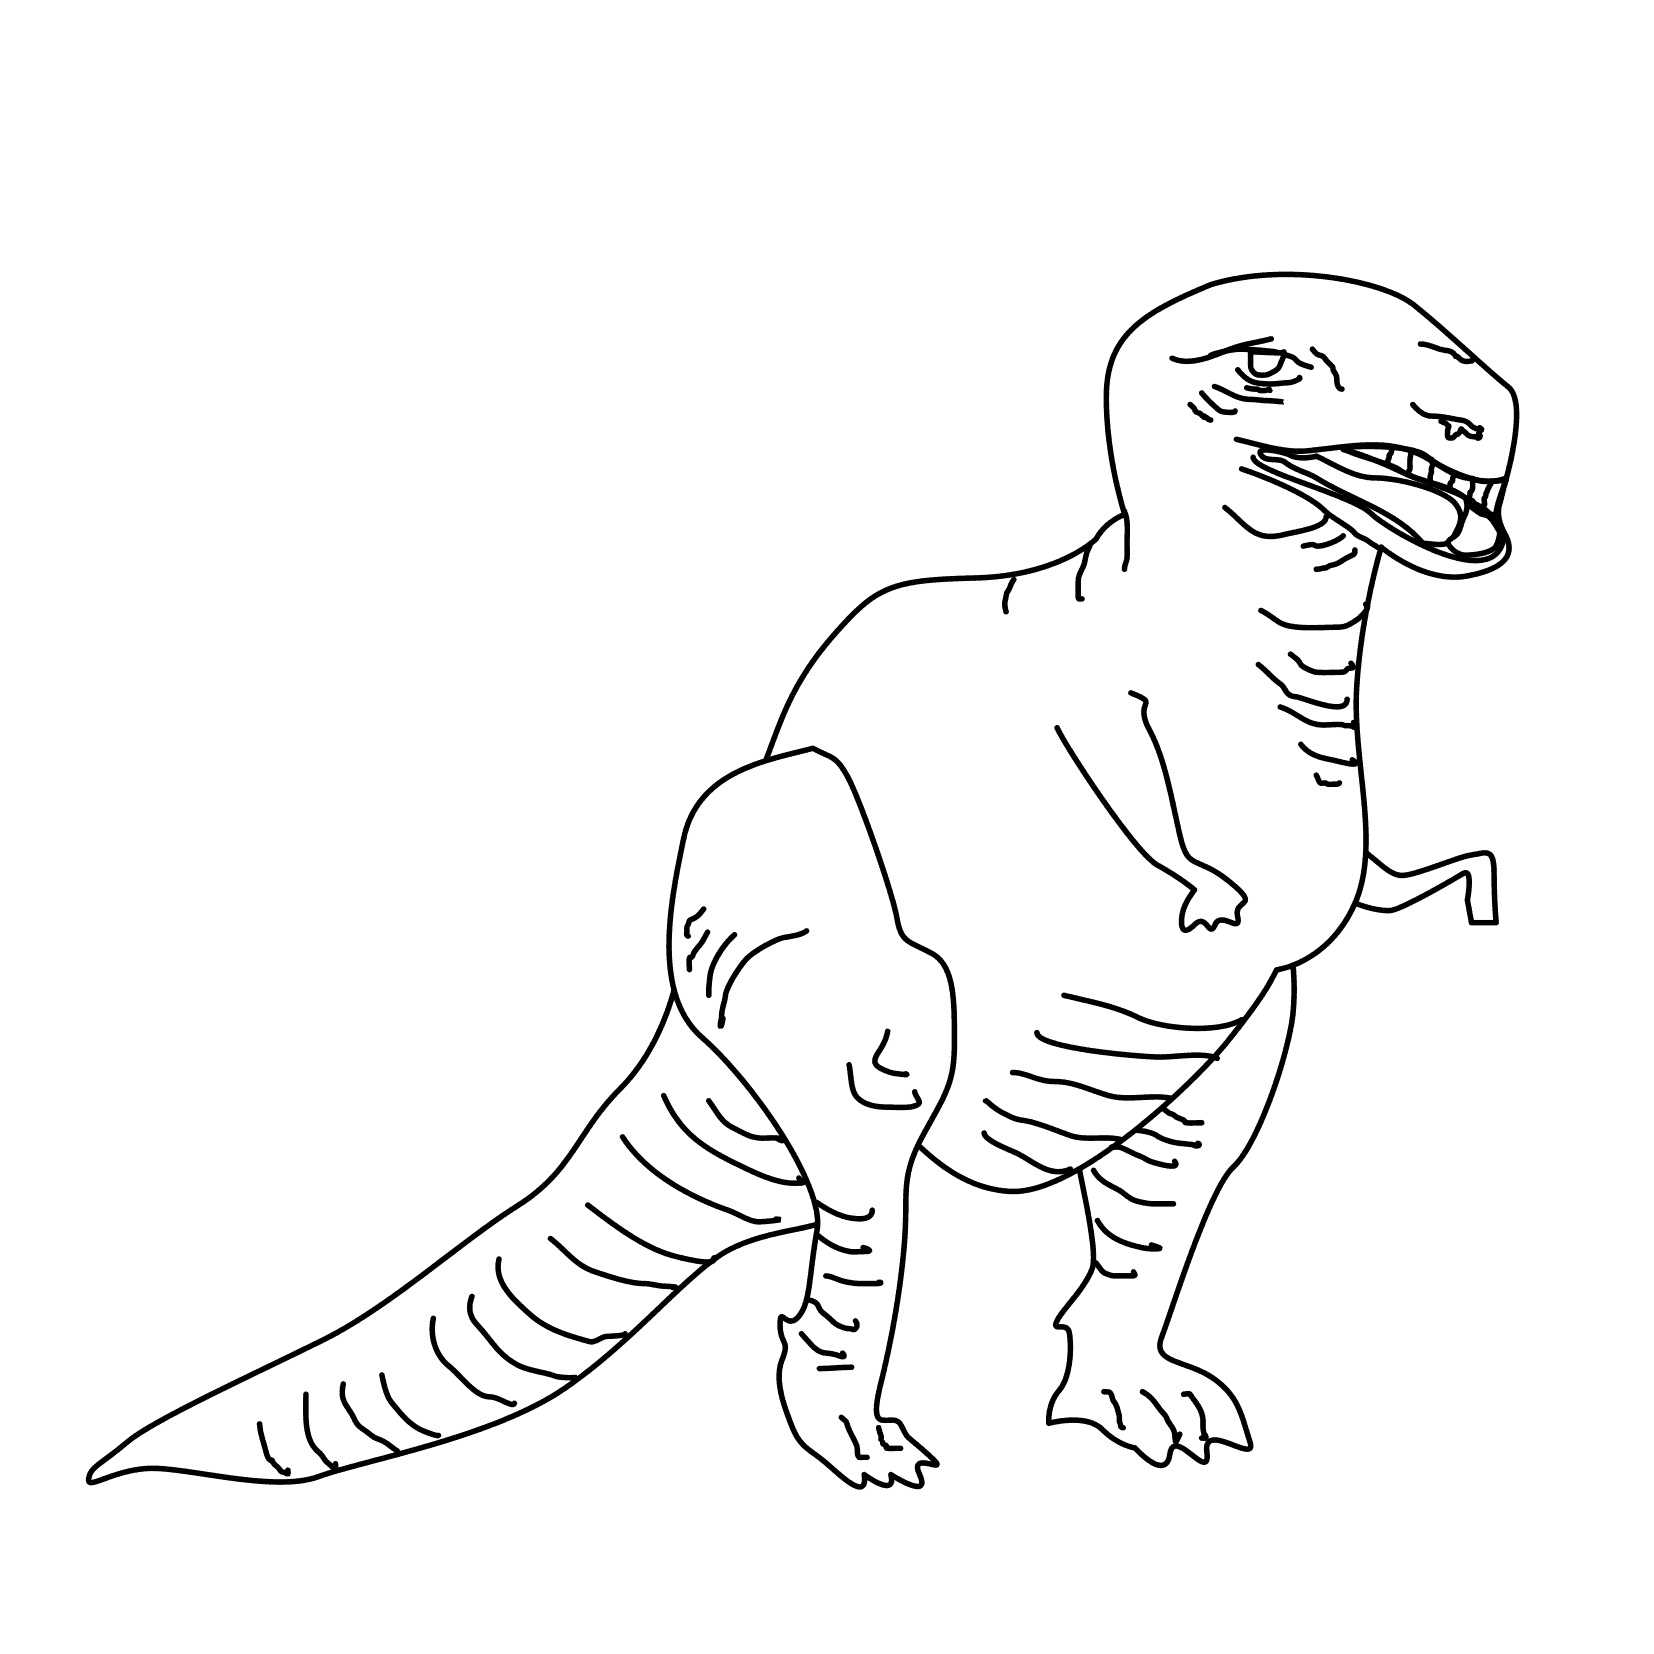 coloring-page-of-dinosaur-photo-animal-place